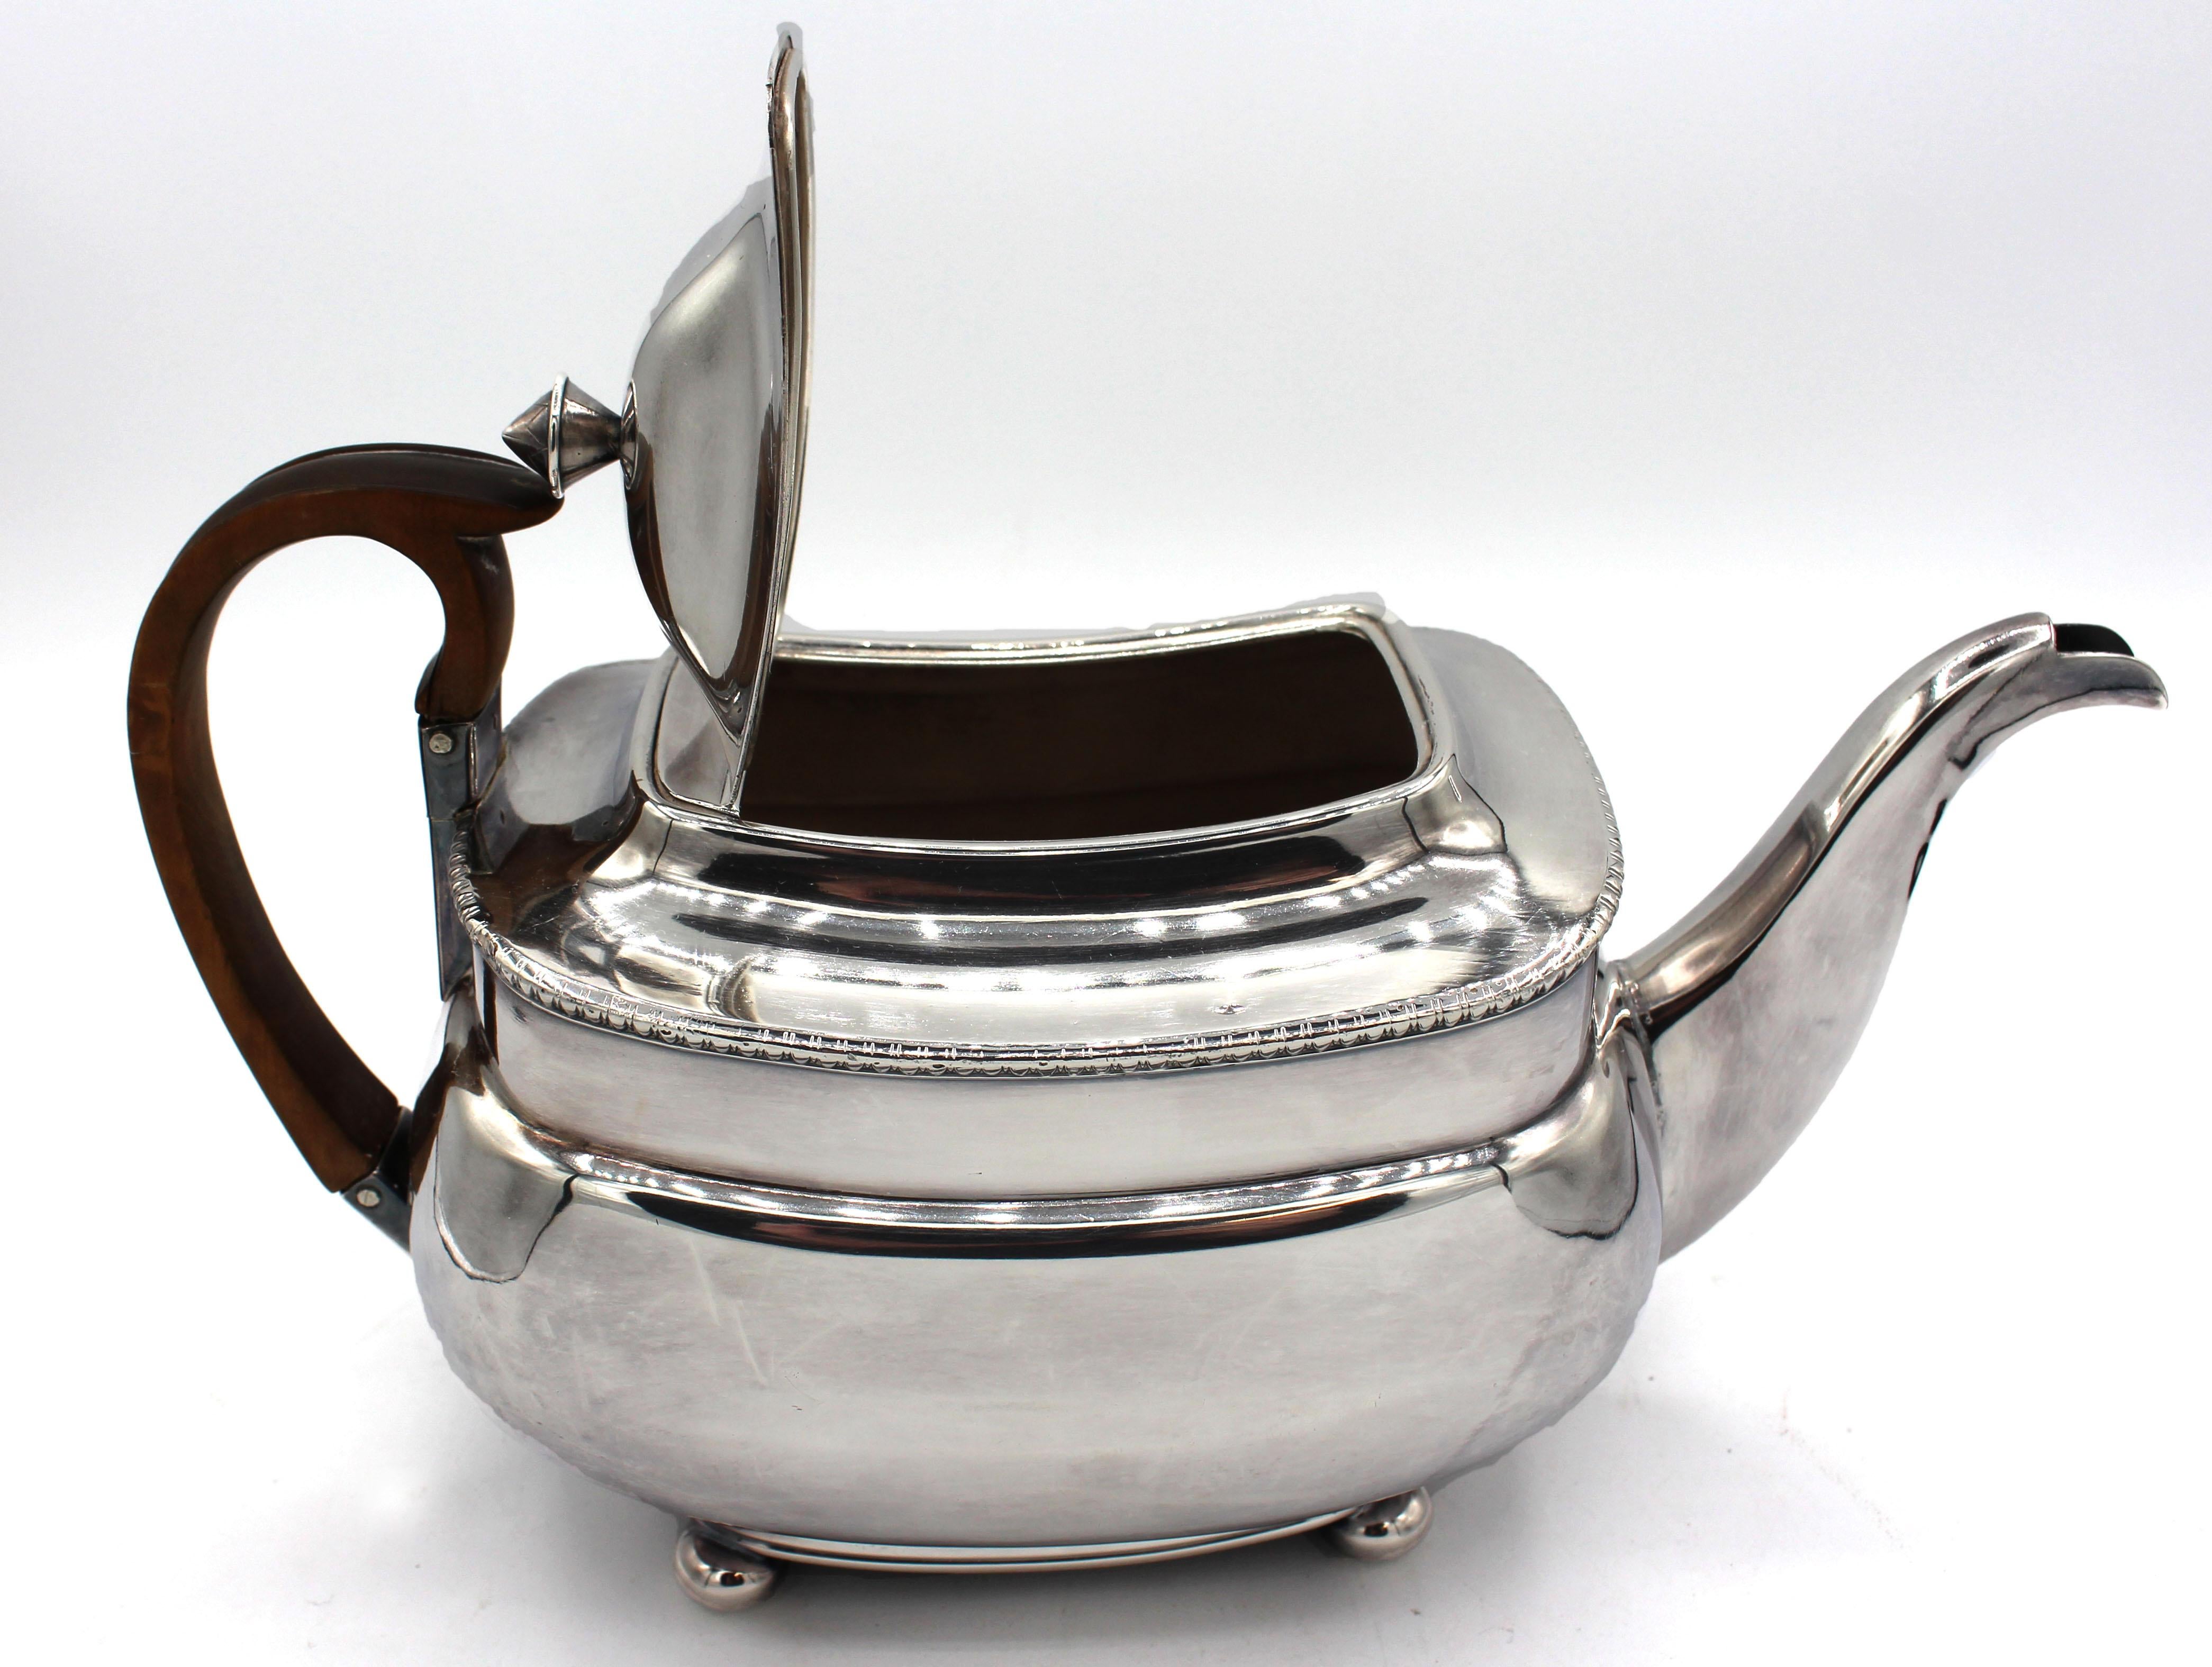 Old Sheffield plate tea pot with pearwood handle, circa 1820, English. Classical period. Egg & dart border, ball feet. One tiny dimple on top.
11.25